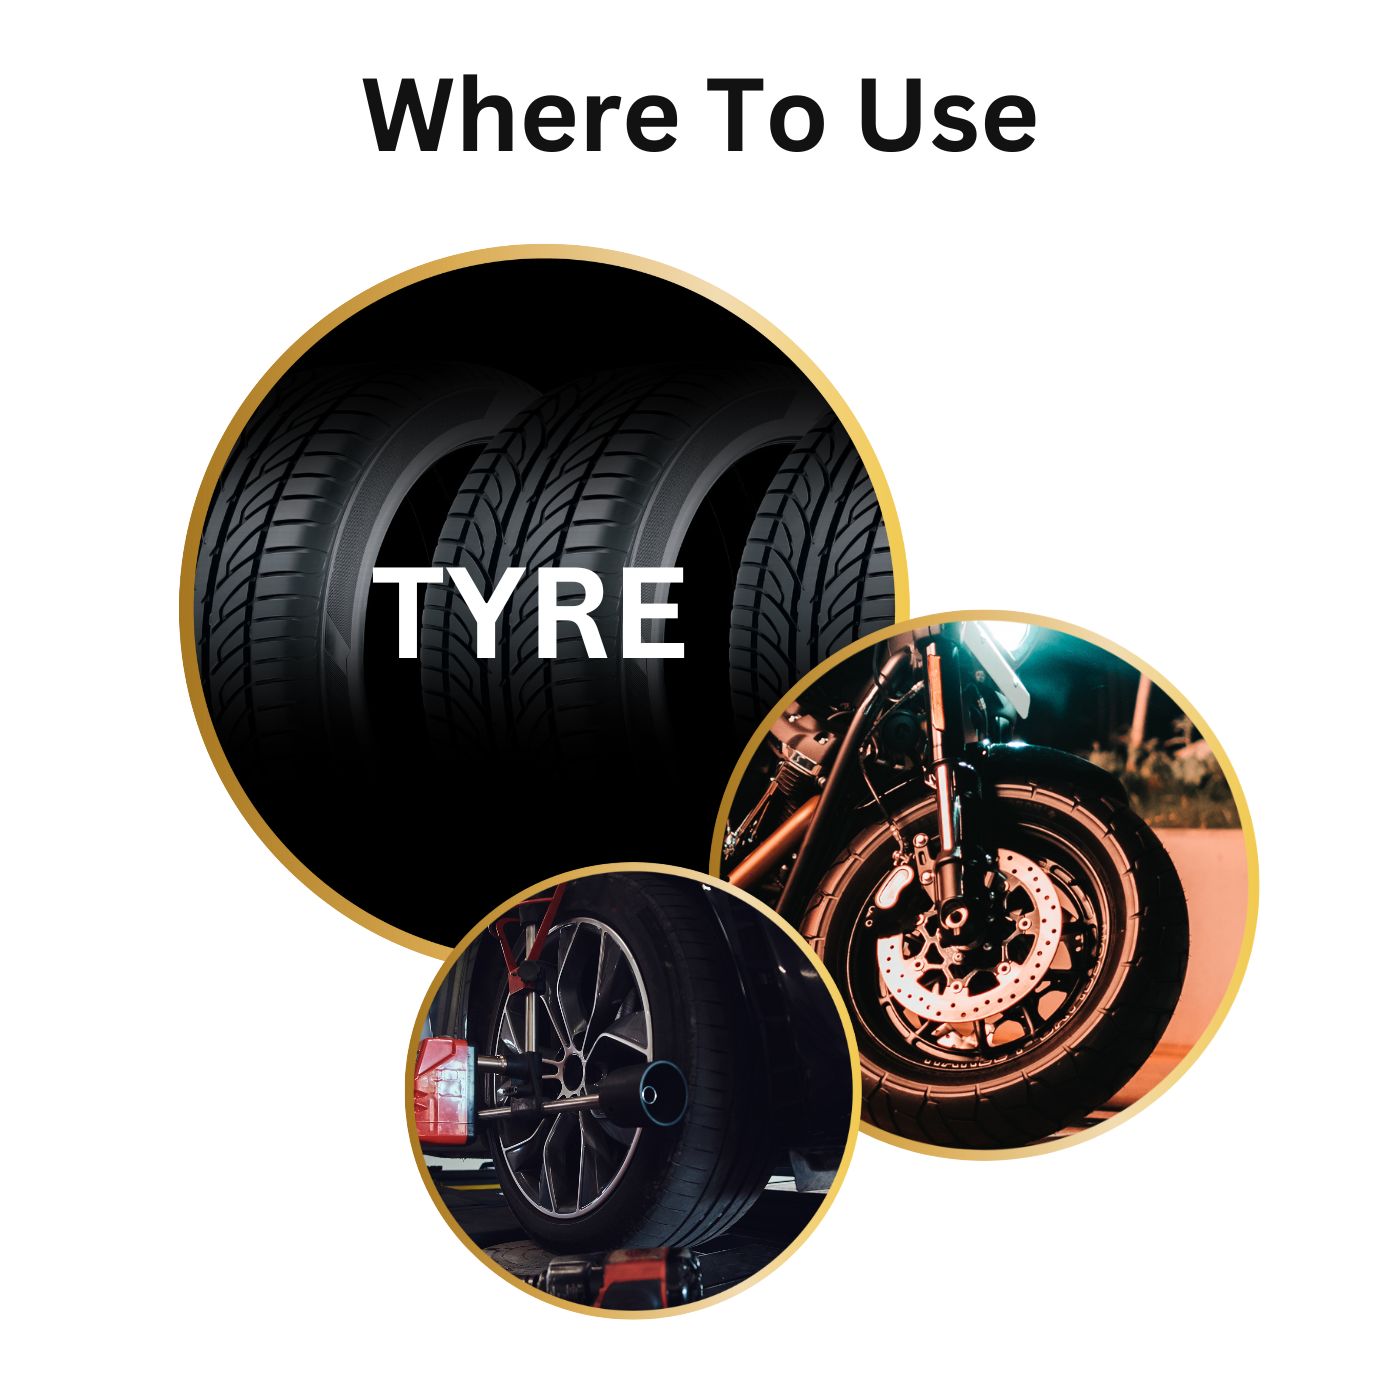 SPARKLES AUTO PARTS on Instagram: Cristal Tire Shine is one of the best  tire shine on the market with amazing results. Get yours today here at  Sparkles Auto Parts & Accessories.